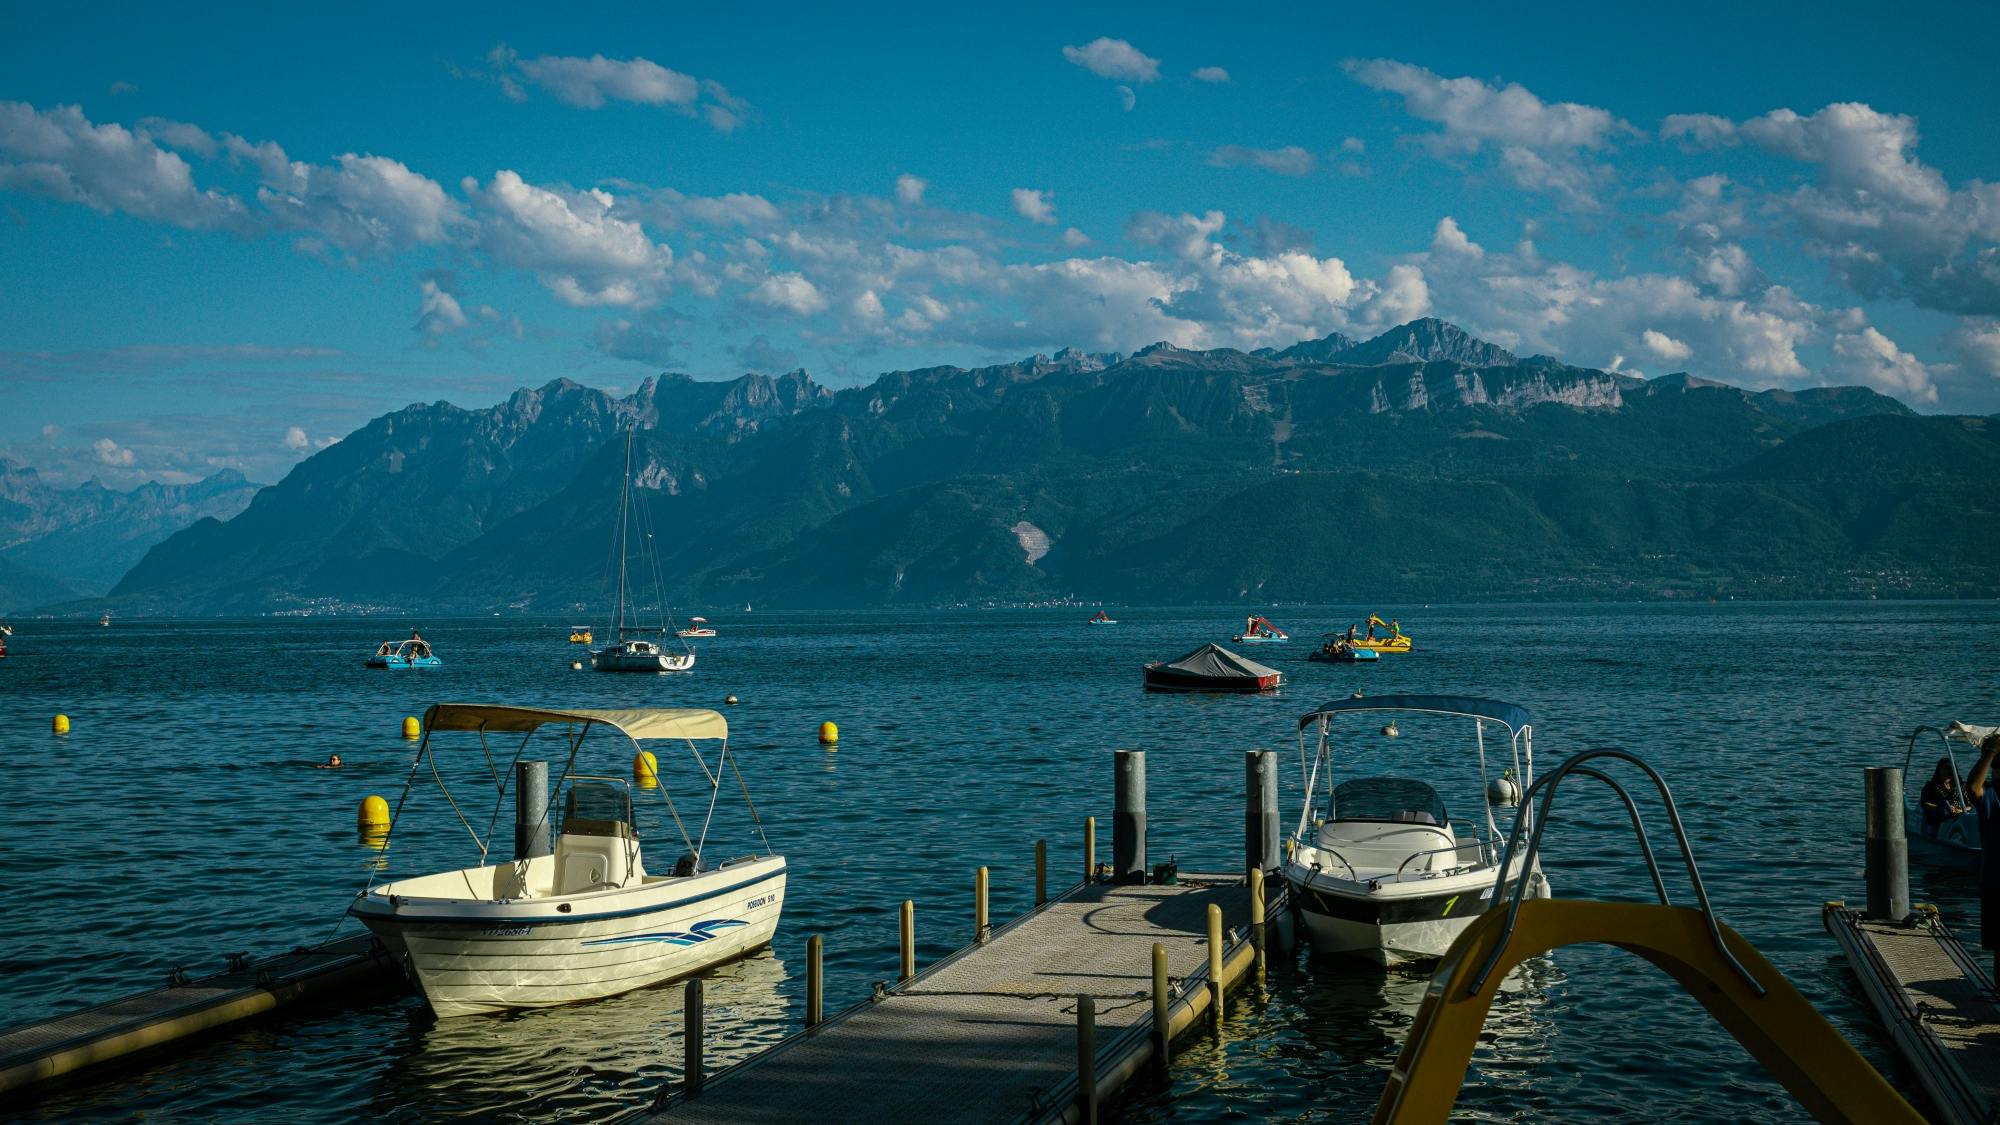 Discover Lausanne's most photogenic spots with a local